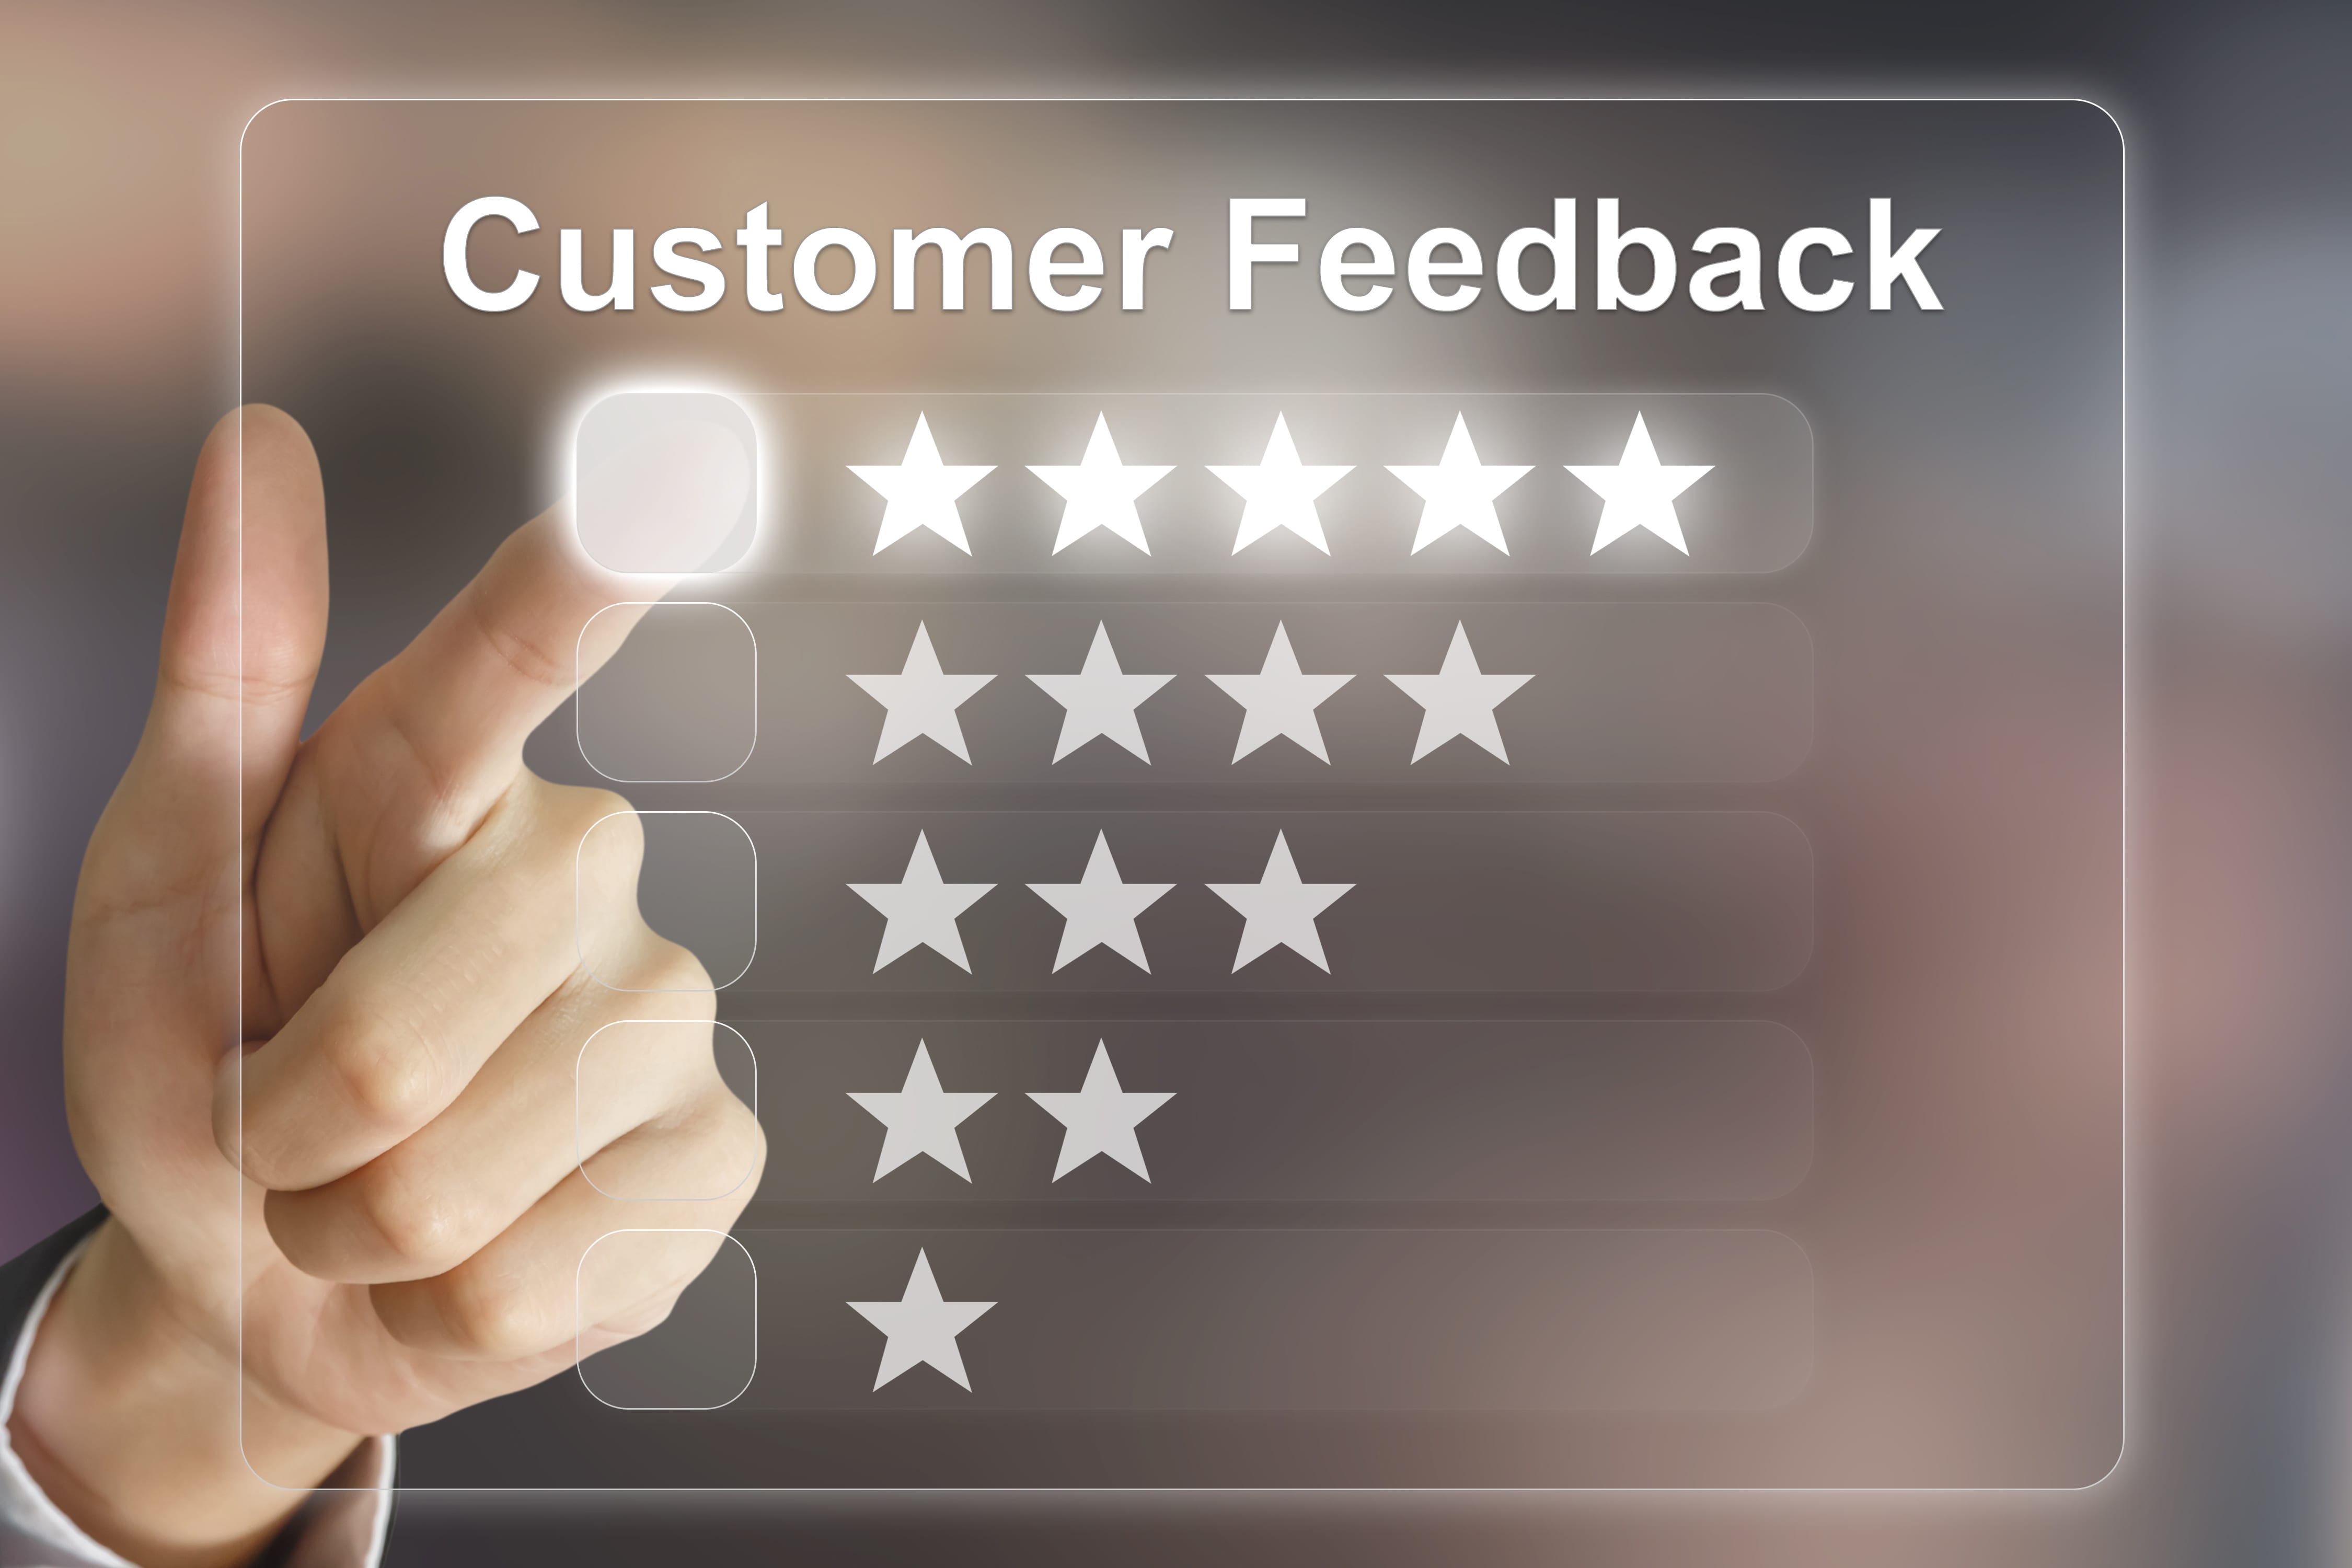 Leveraging Customer Feedback to Help Customers Achieve Operational Excellence